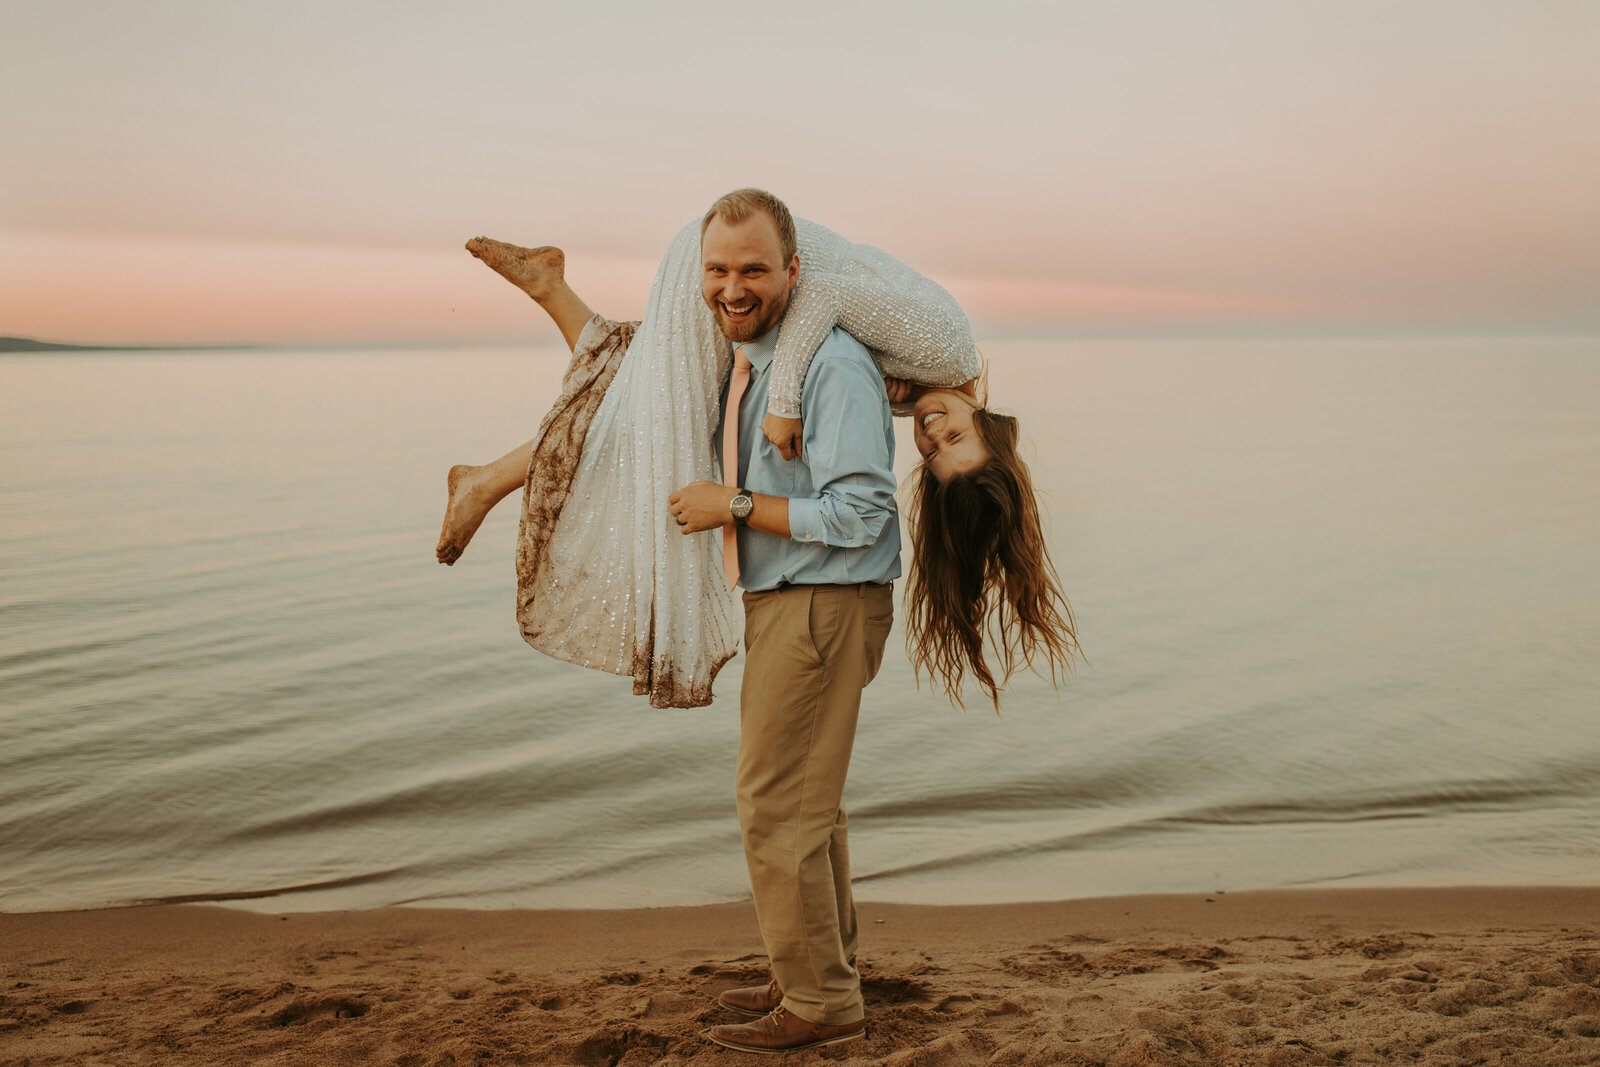 kacey+ted_duluth_elopement-616